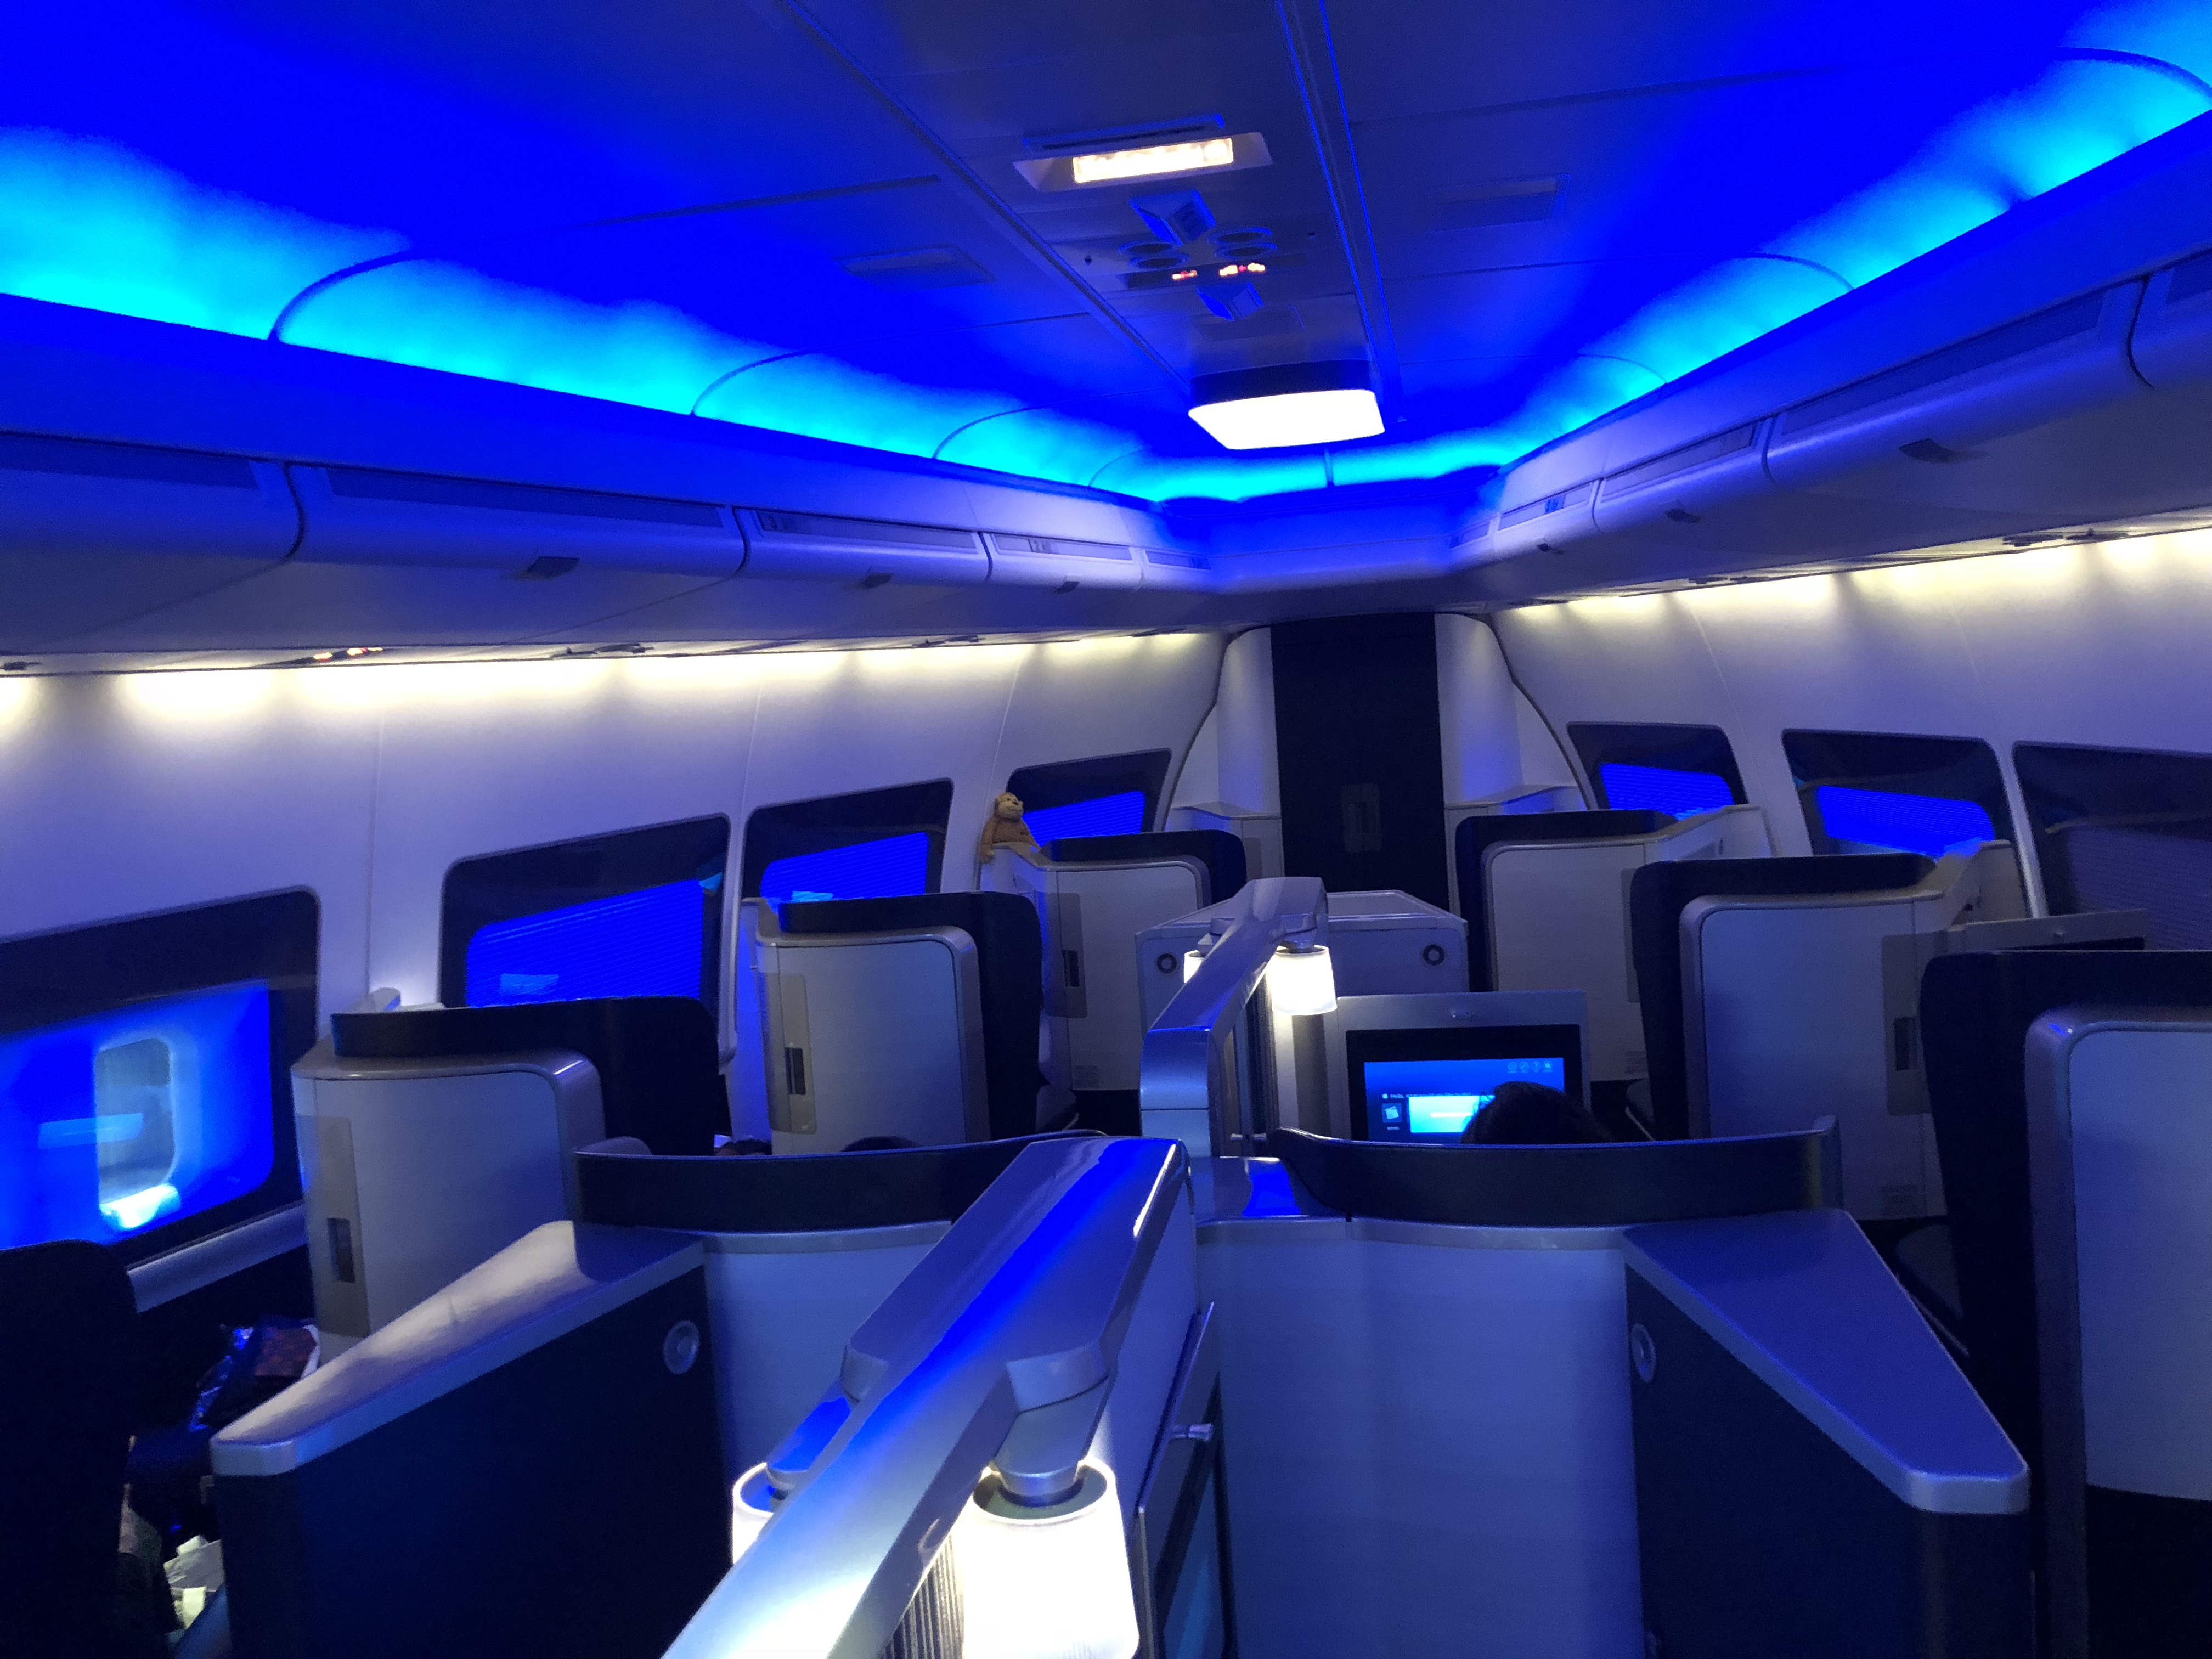 a blue light in an airplane